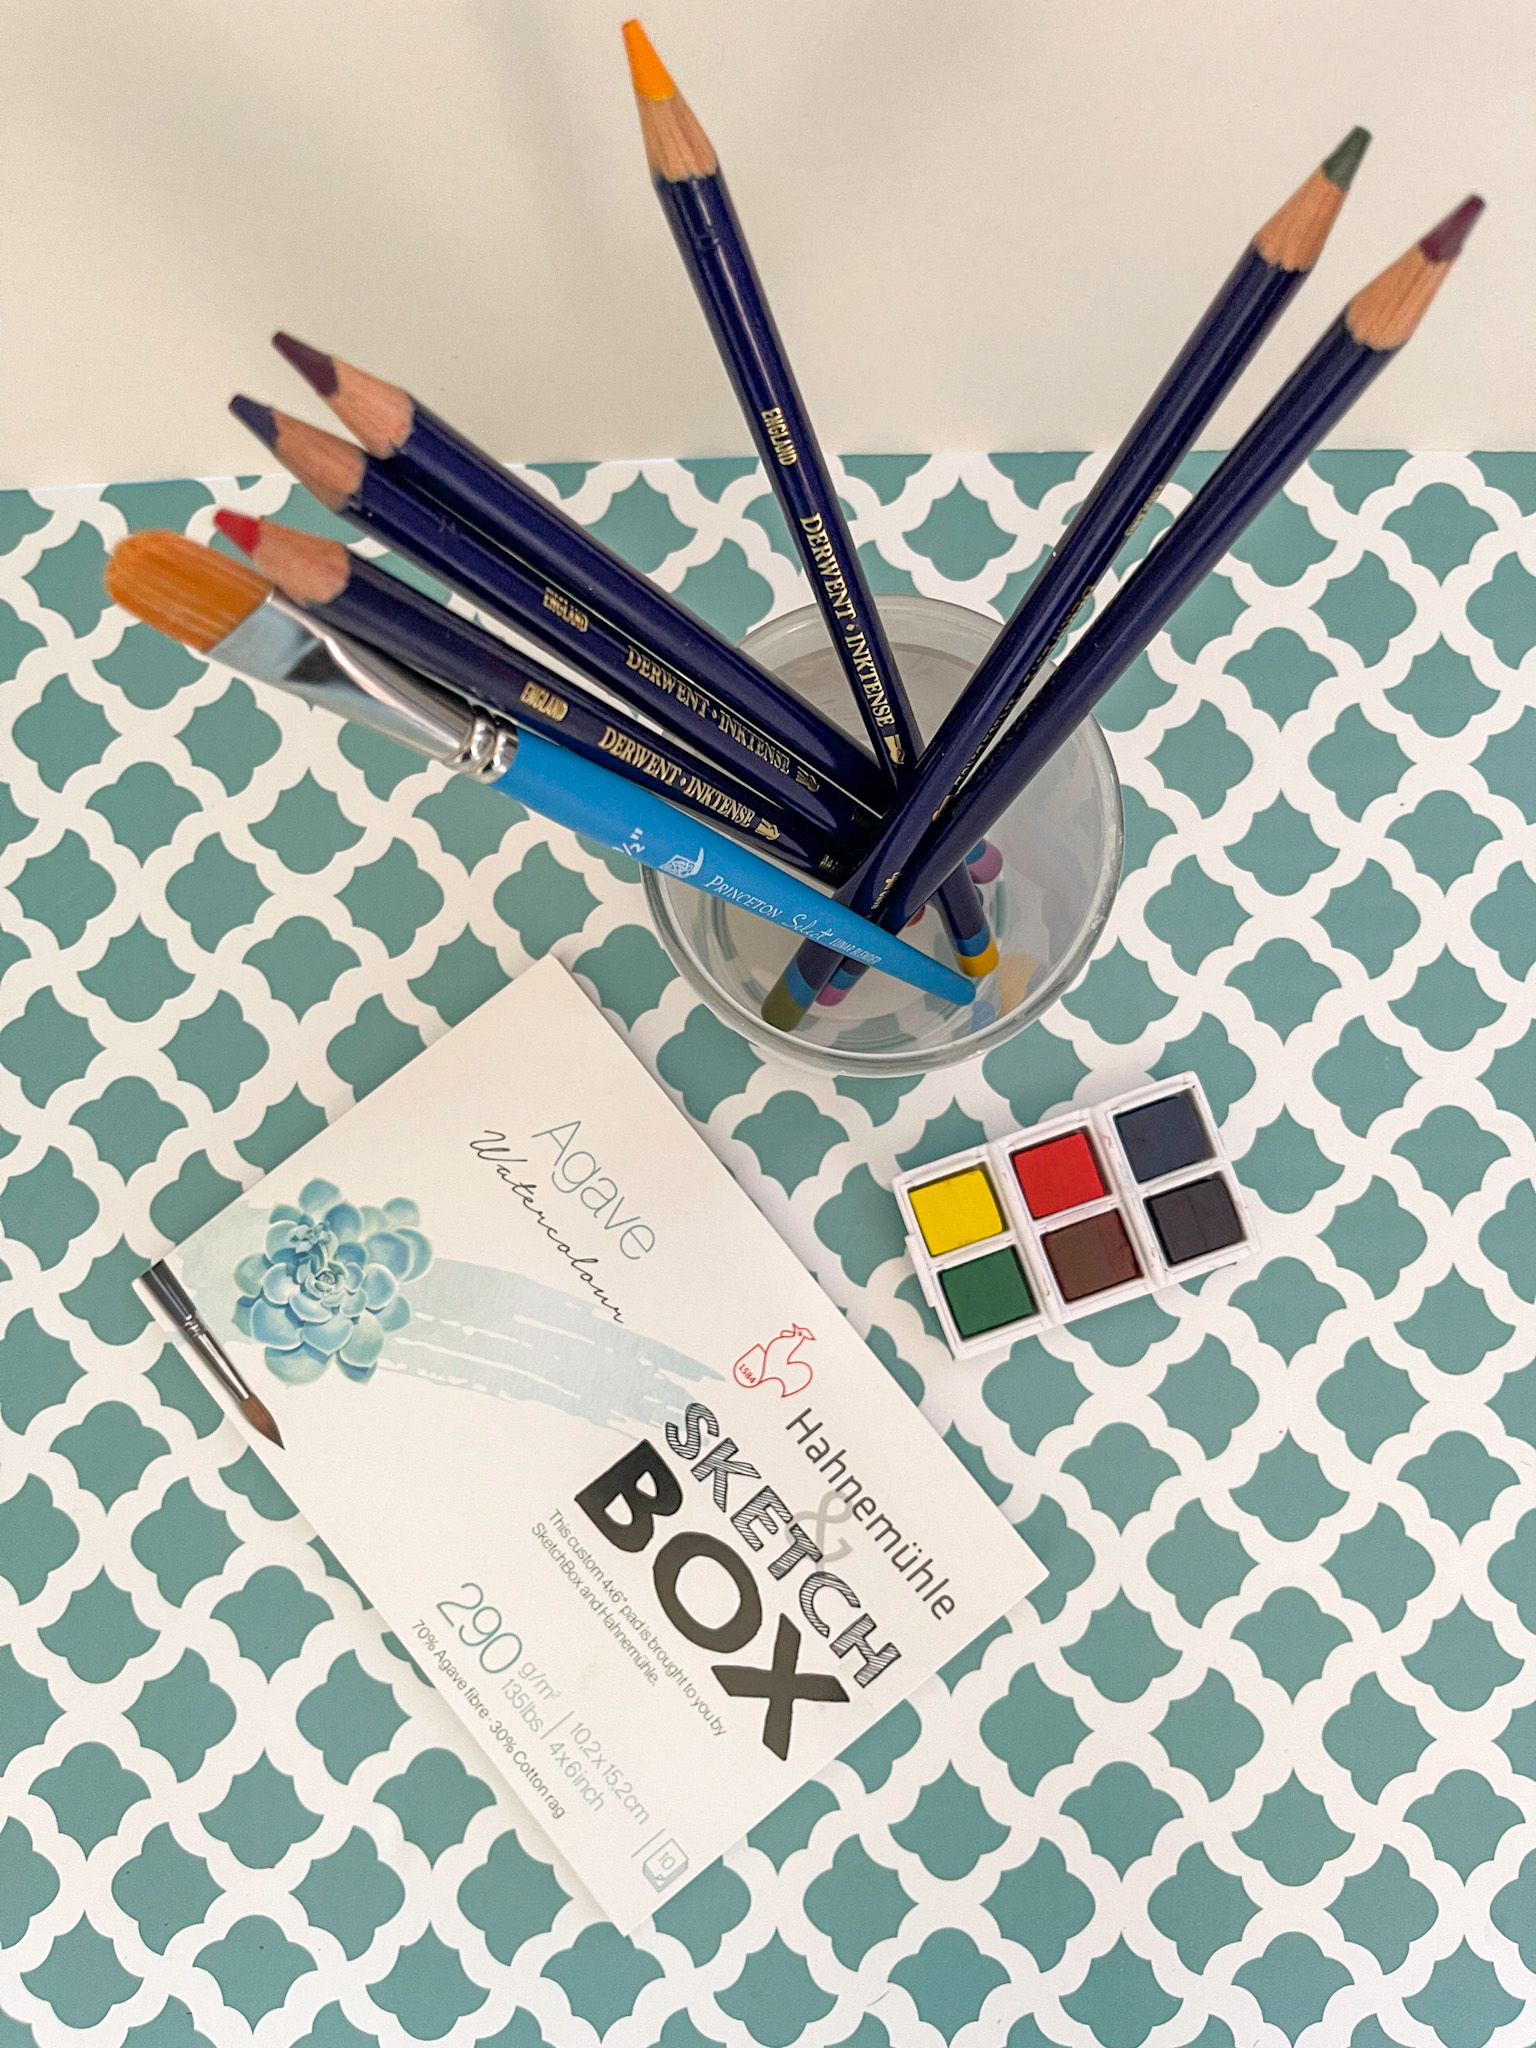 Unboxing New Watercolor Tin Boxes PLUS other Watercolor Palette Ideas 